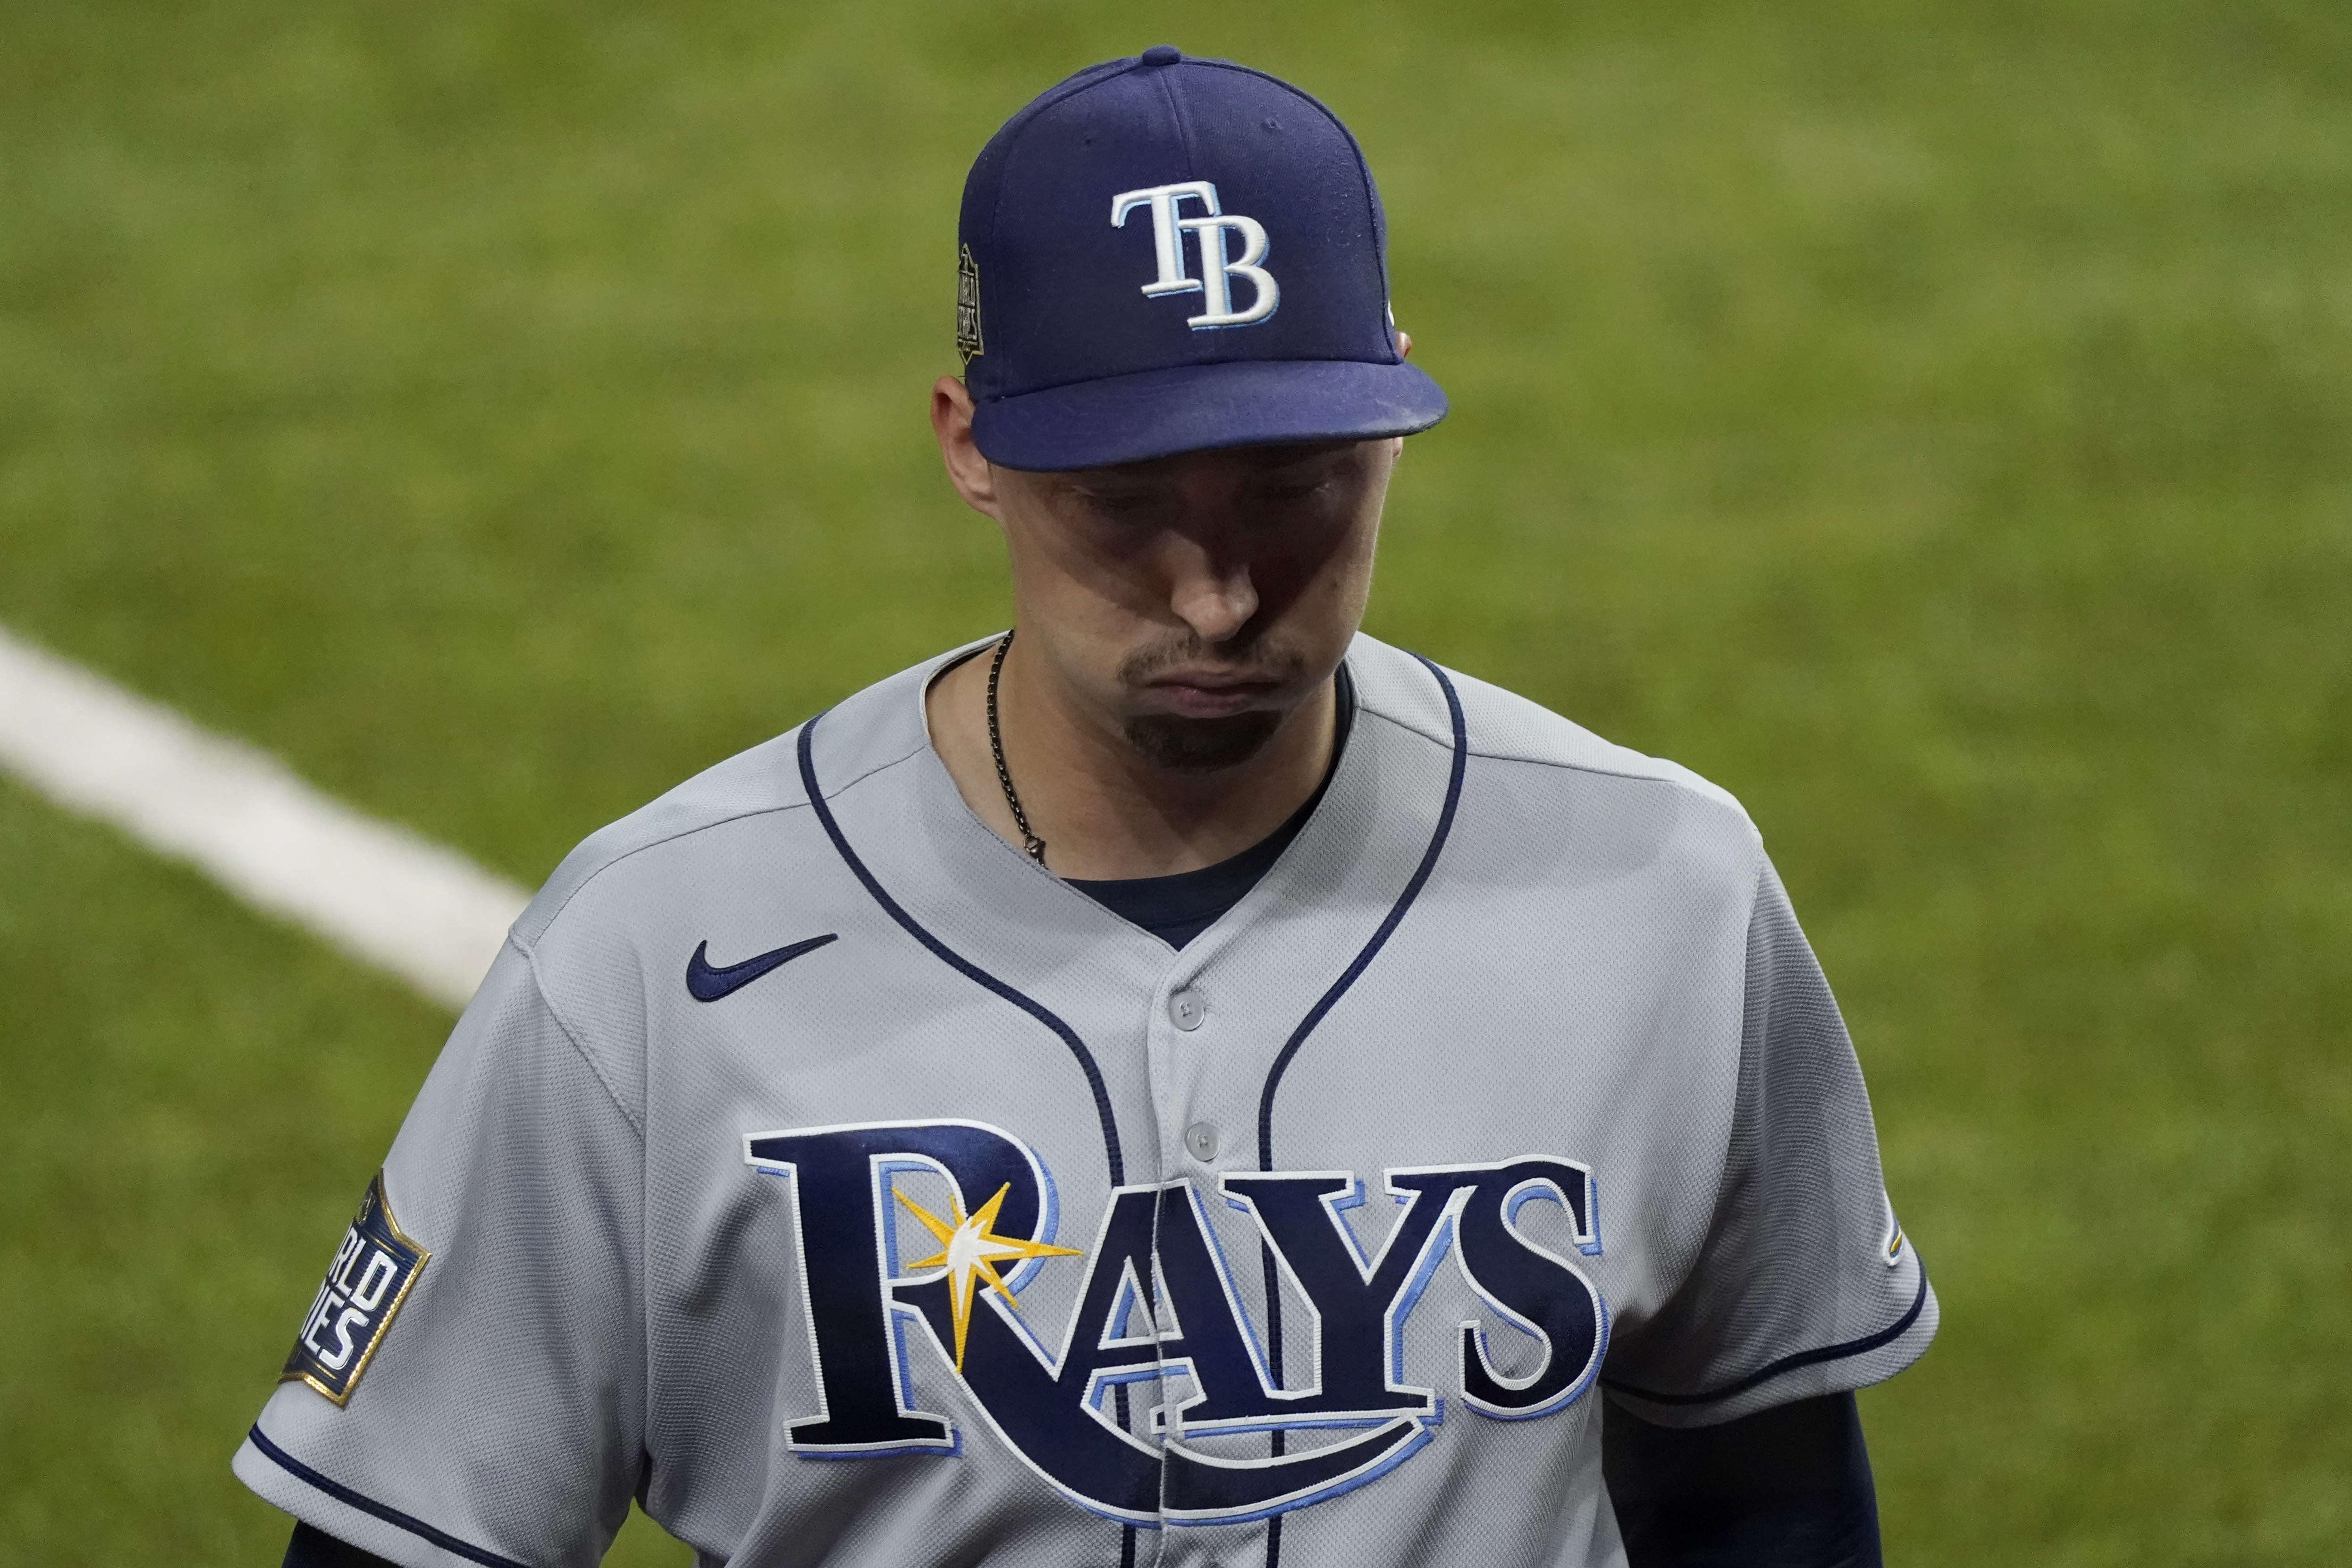 Padres News: Friars set to acquire Rays P Blake Snell - Gaslamp Ball